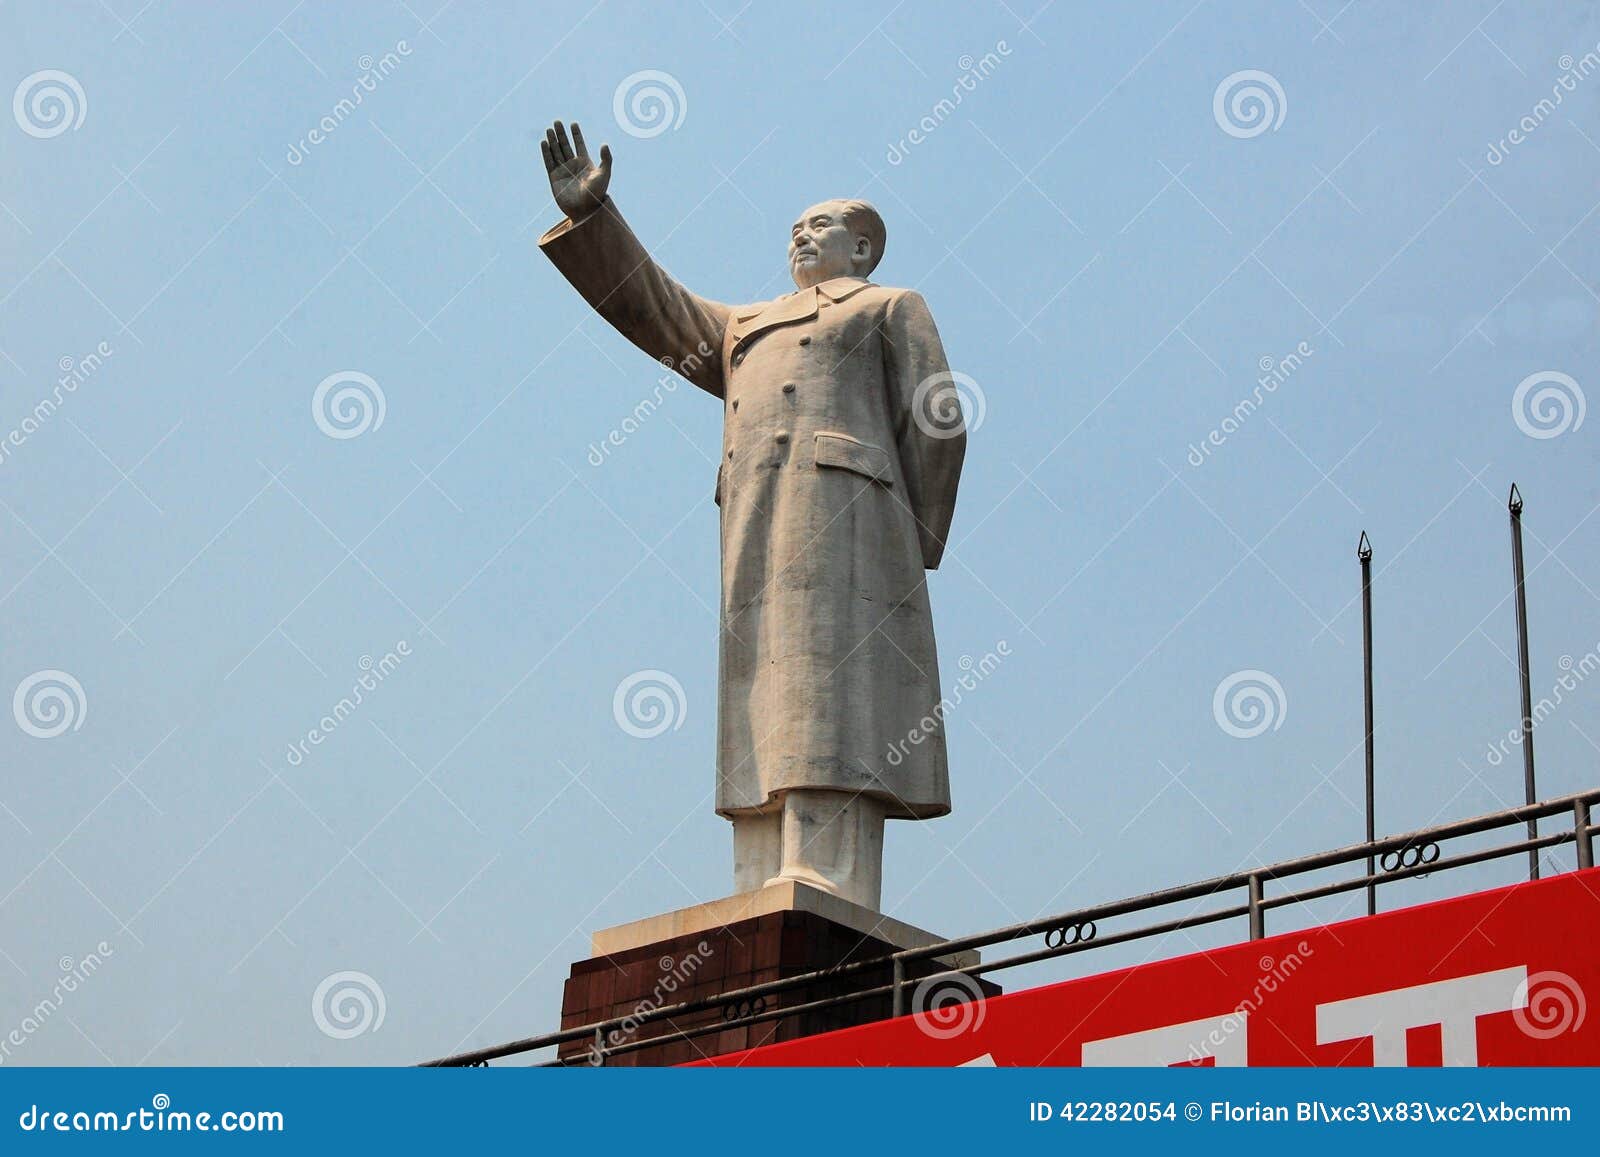 statue of china's former chairman mao zedong